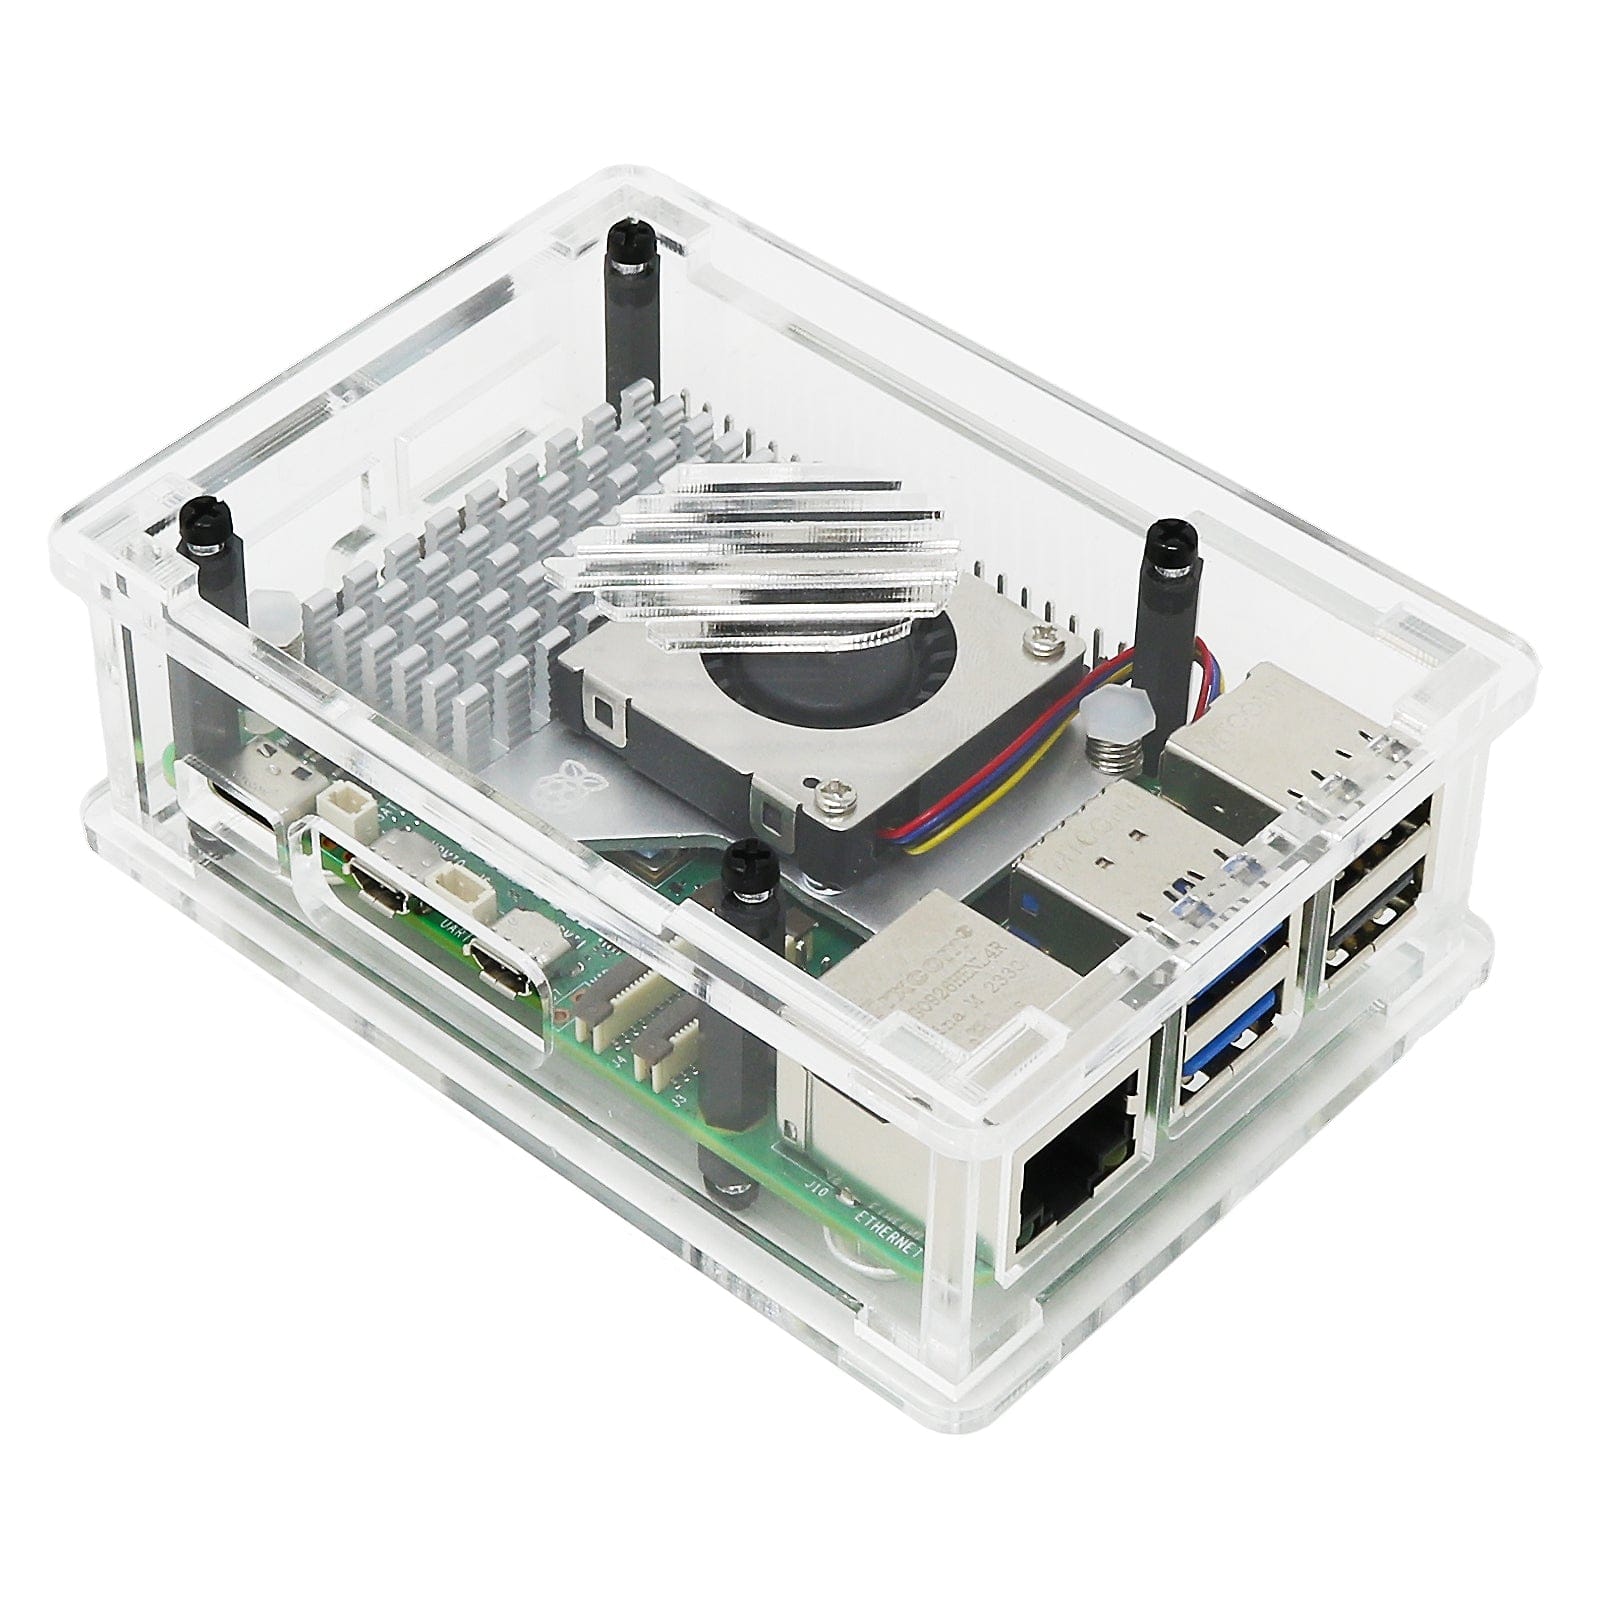 Case for Raspberry Pi 5 and Active Cooler - The Pi Hut